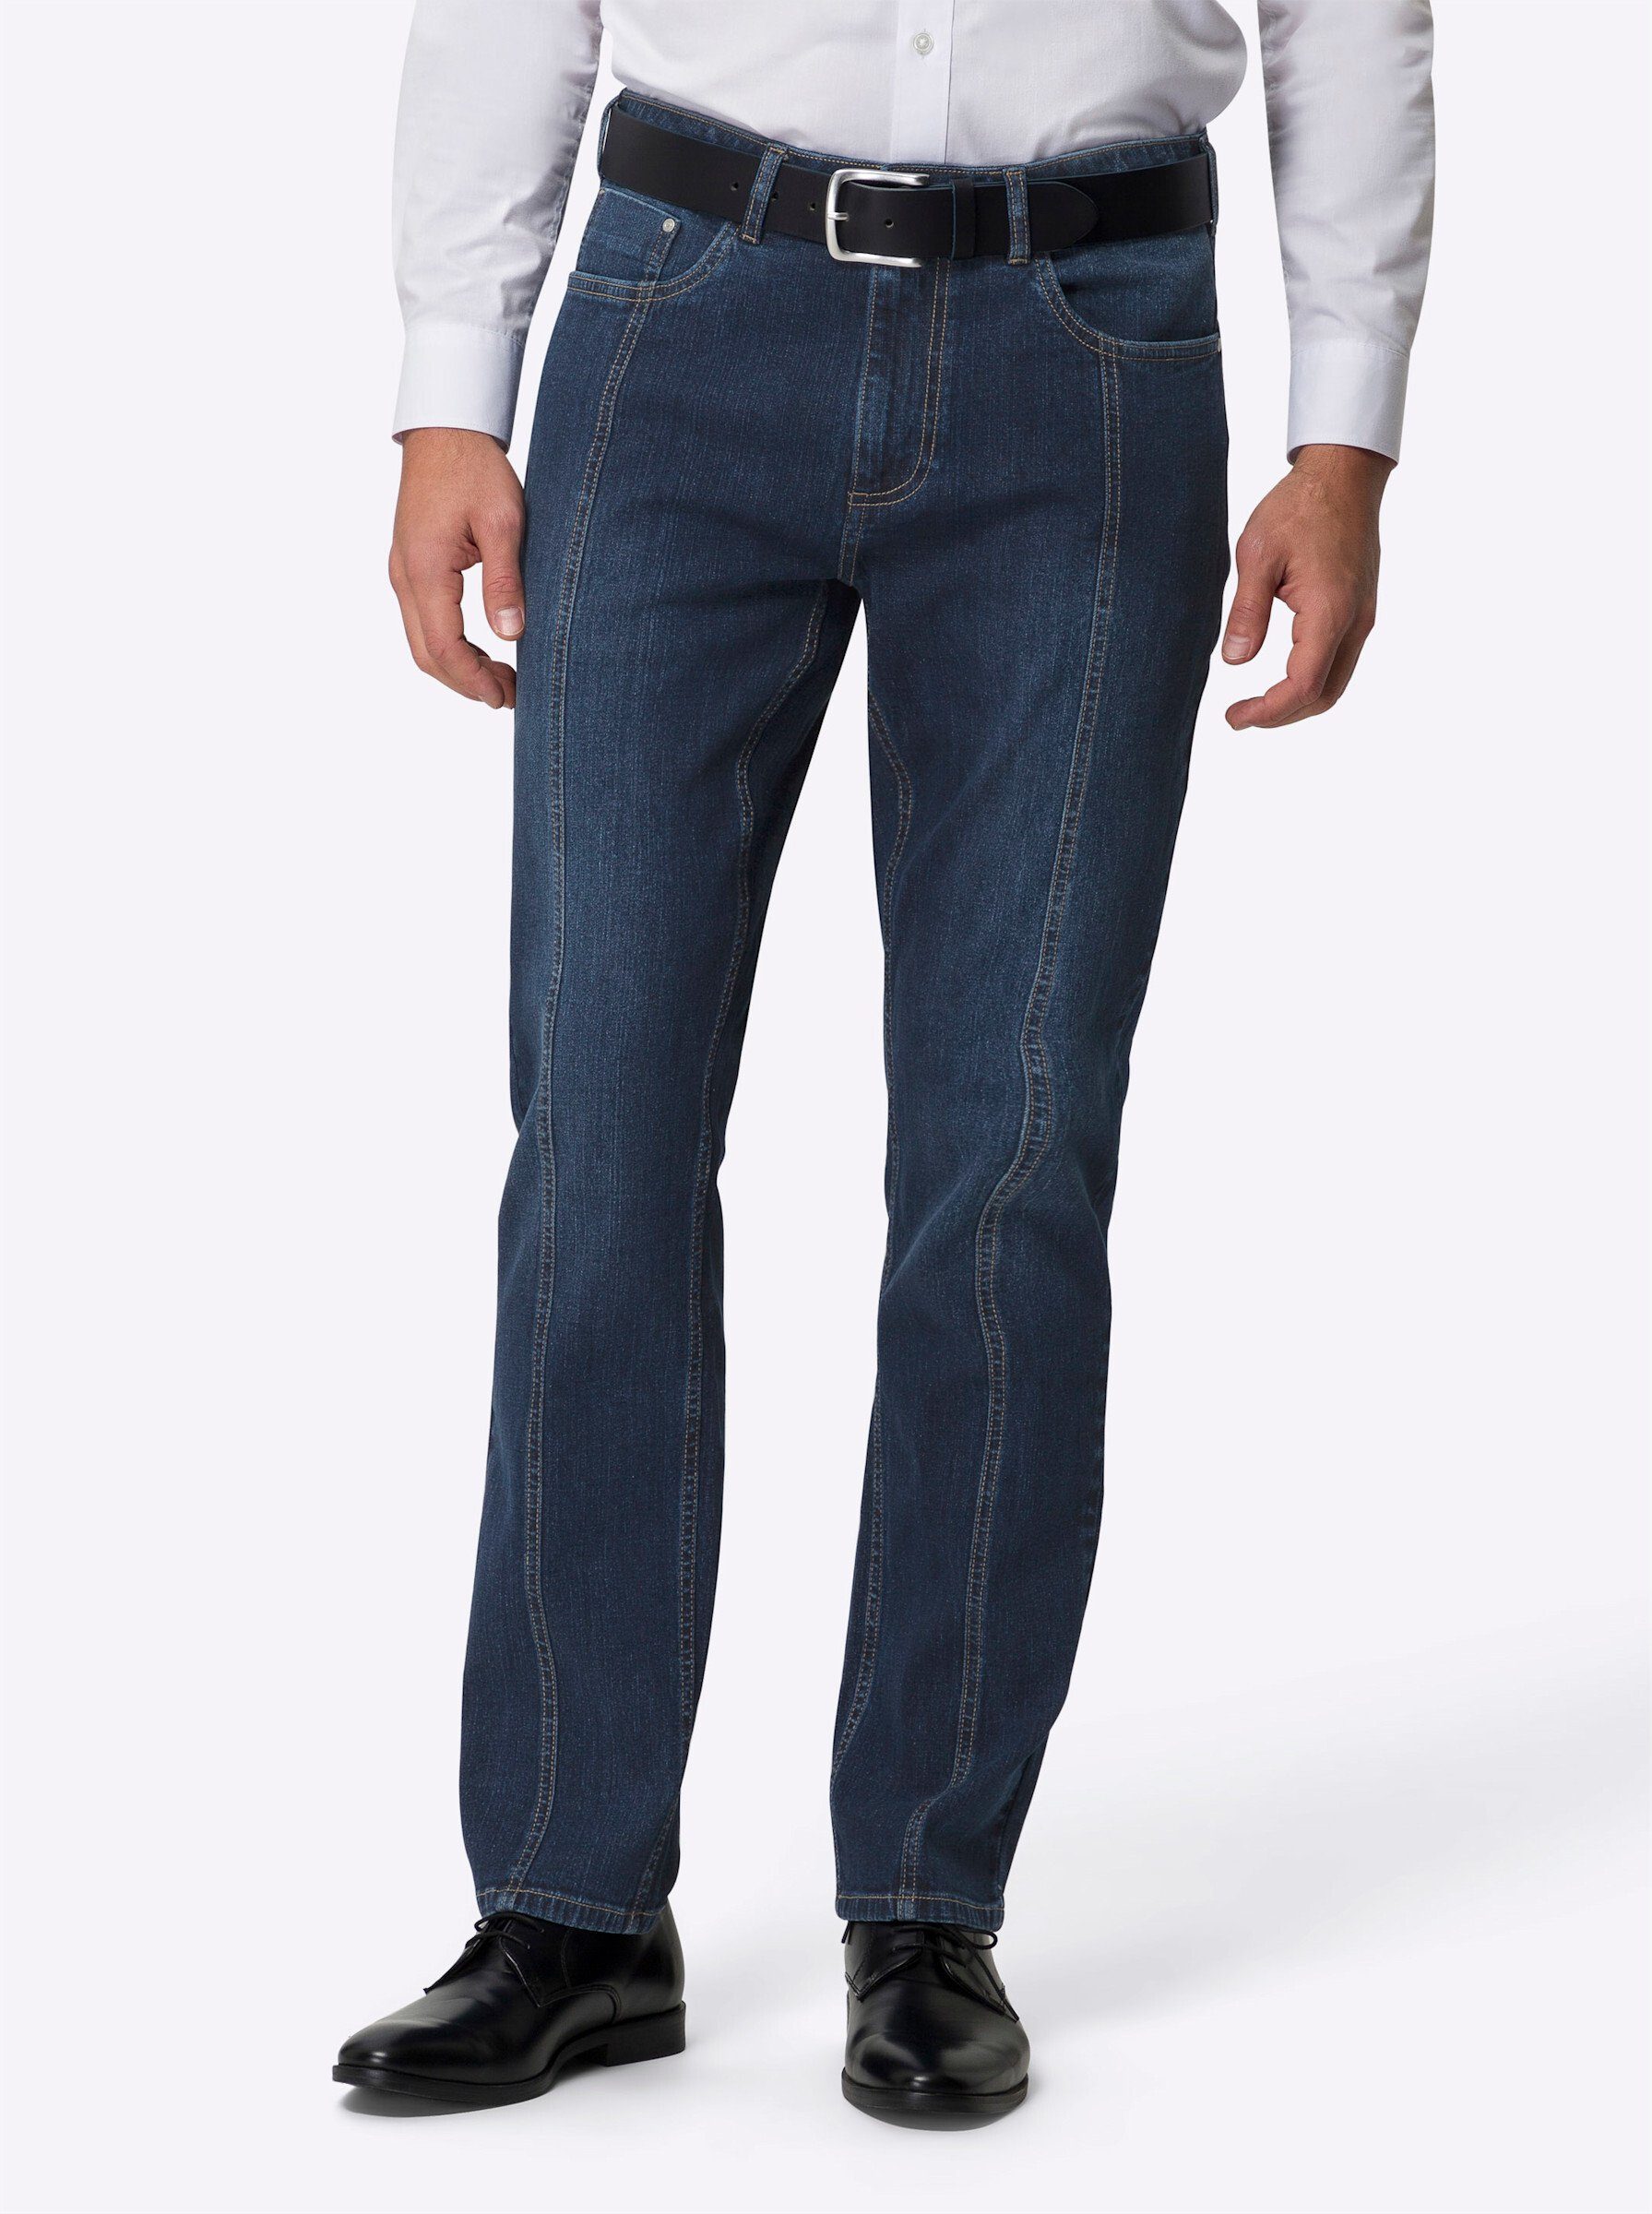 Sieh an! Bequeme Jeans blue-stone-washed | Jeans